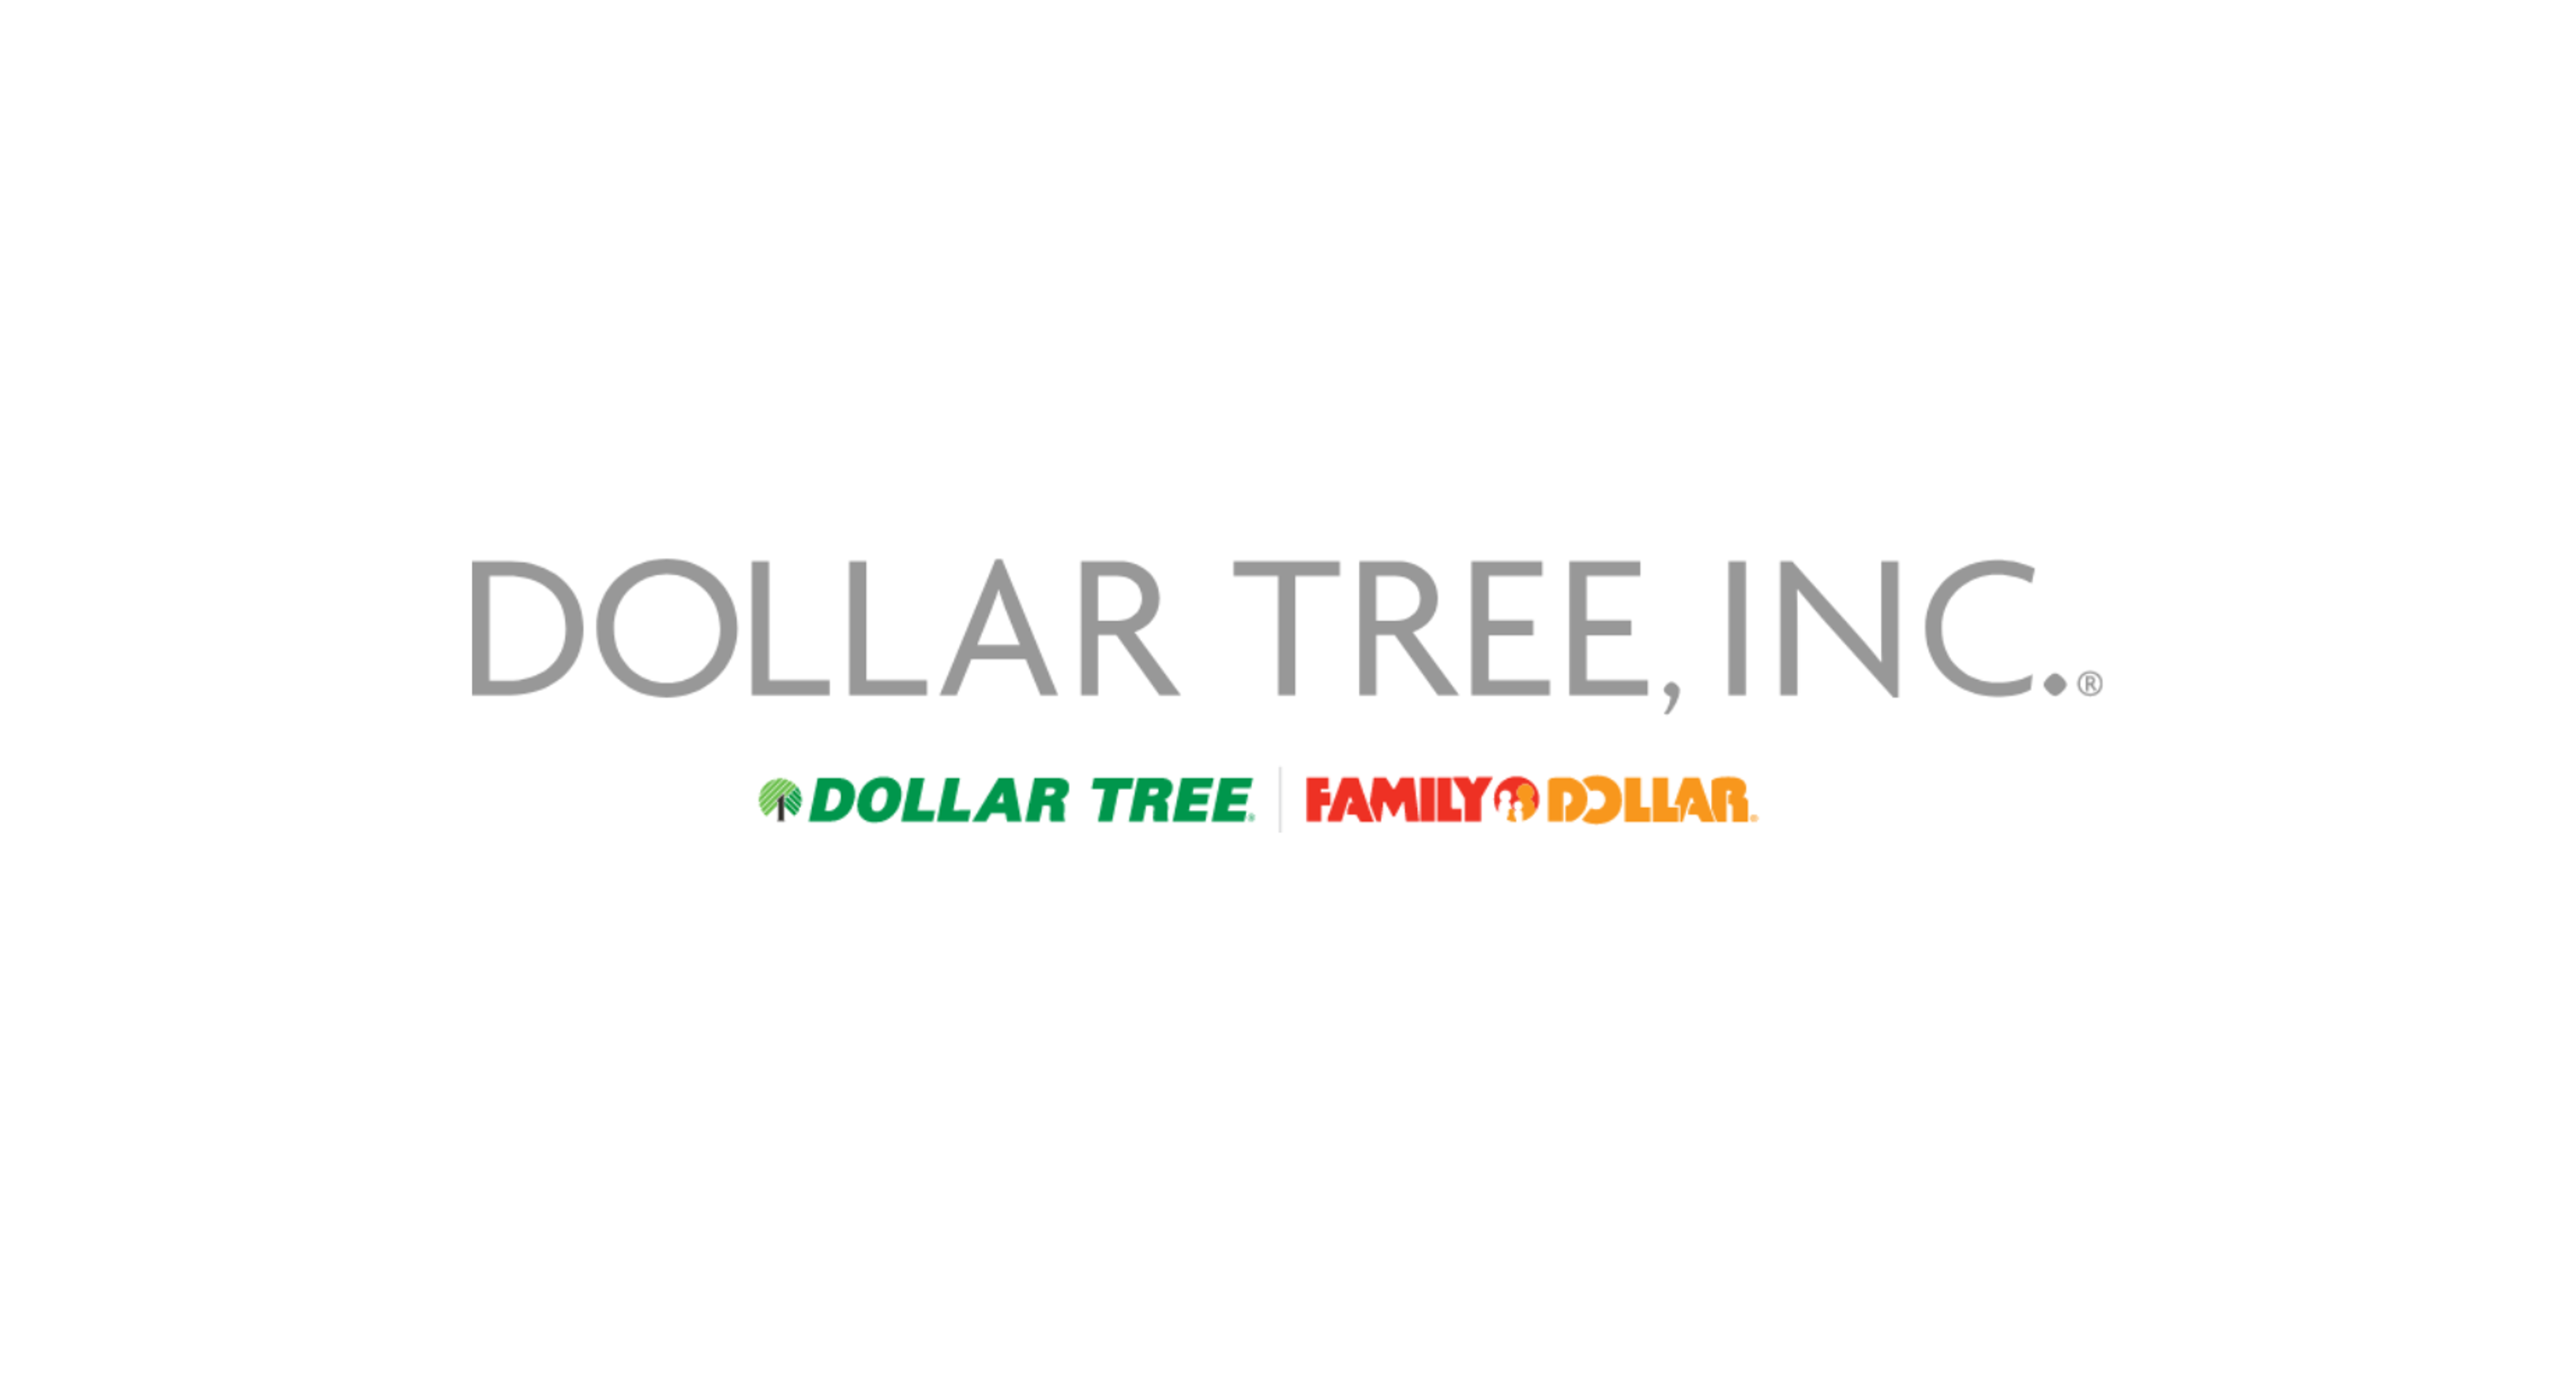 Despite Rough Waters, Dollar Tree Holds Promise In The Long Term, Says Analyst